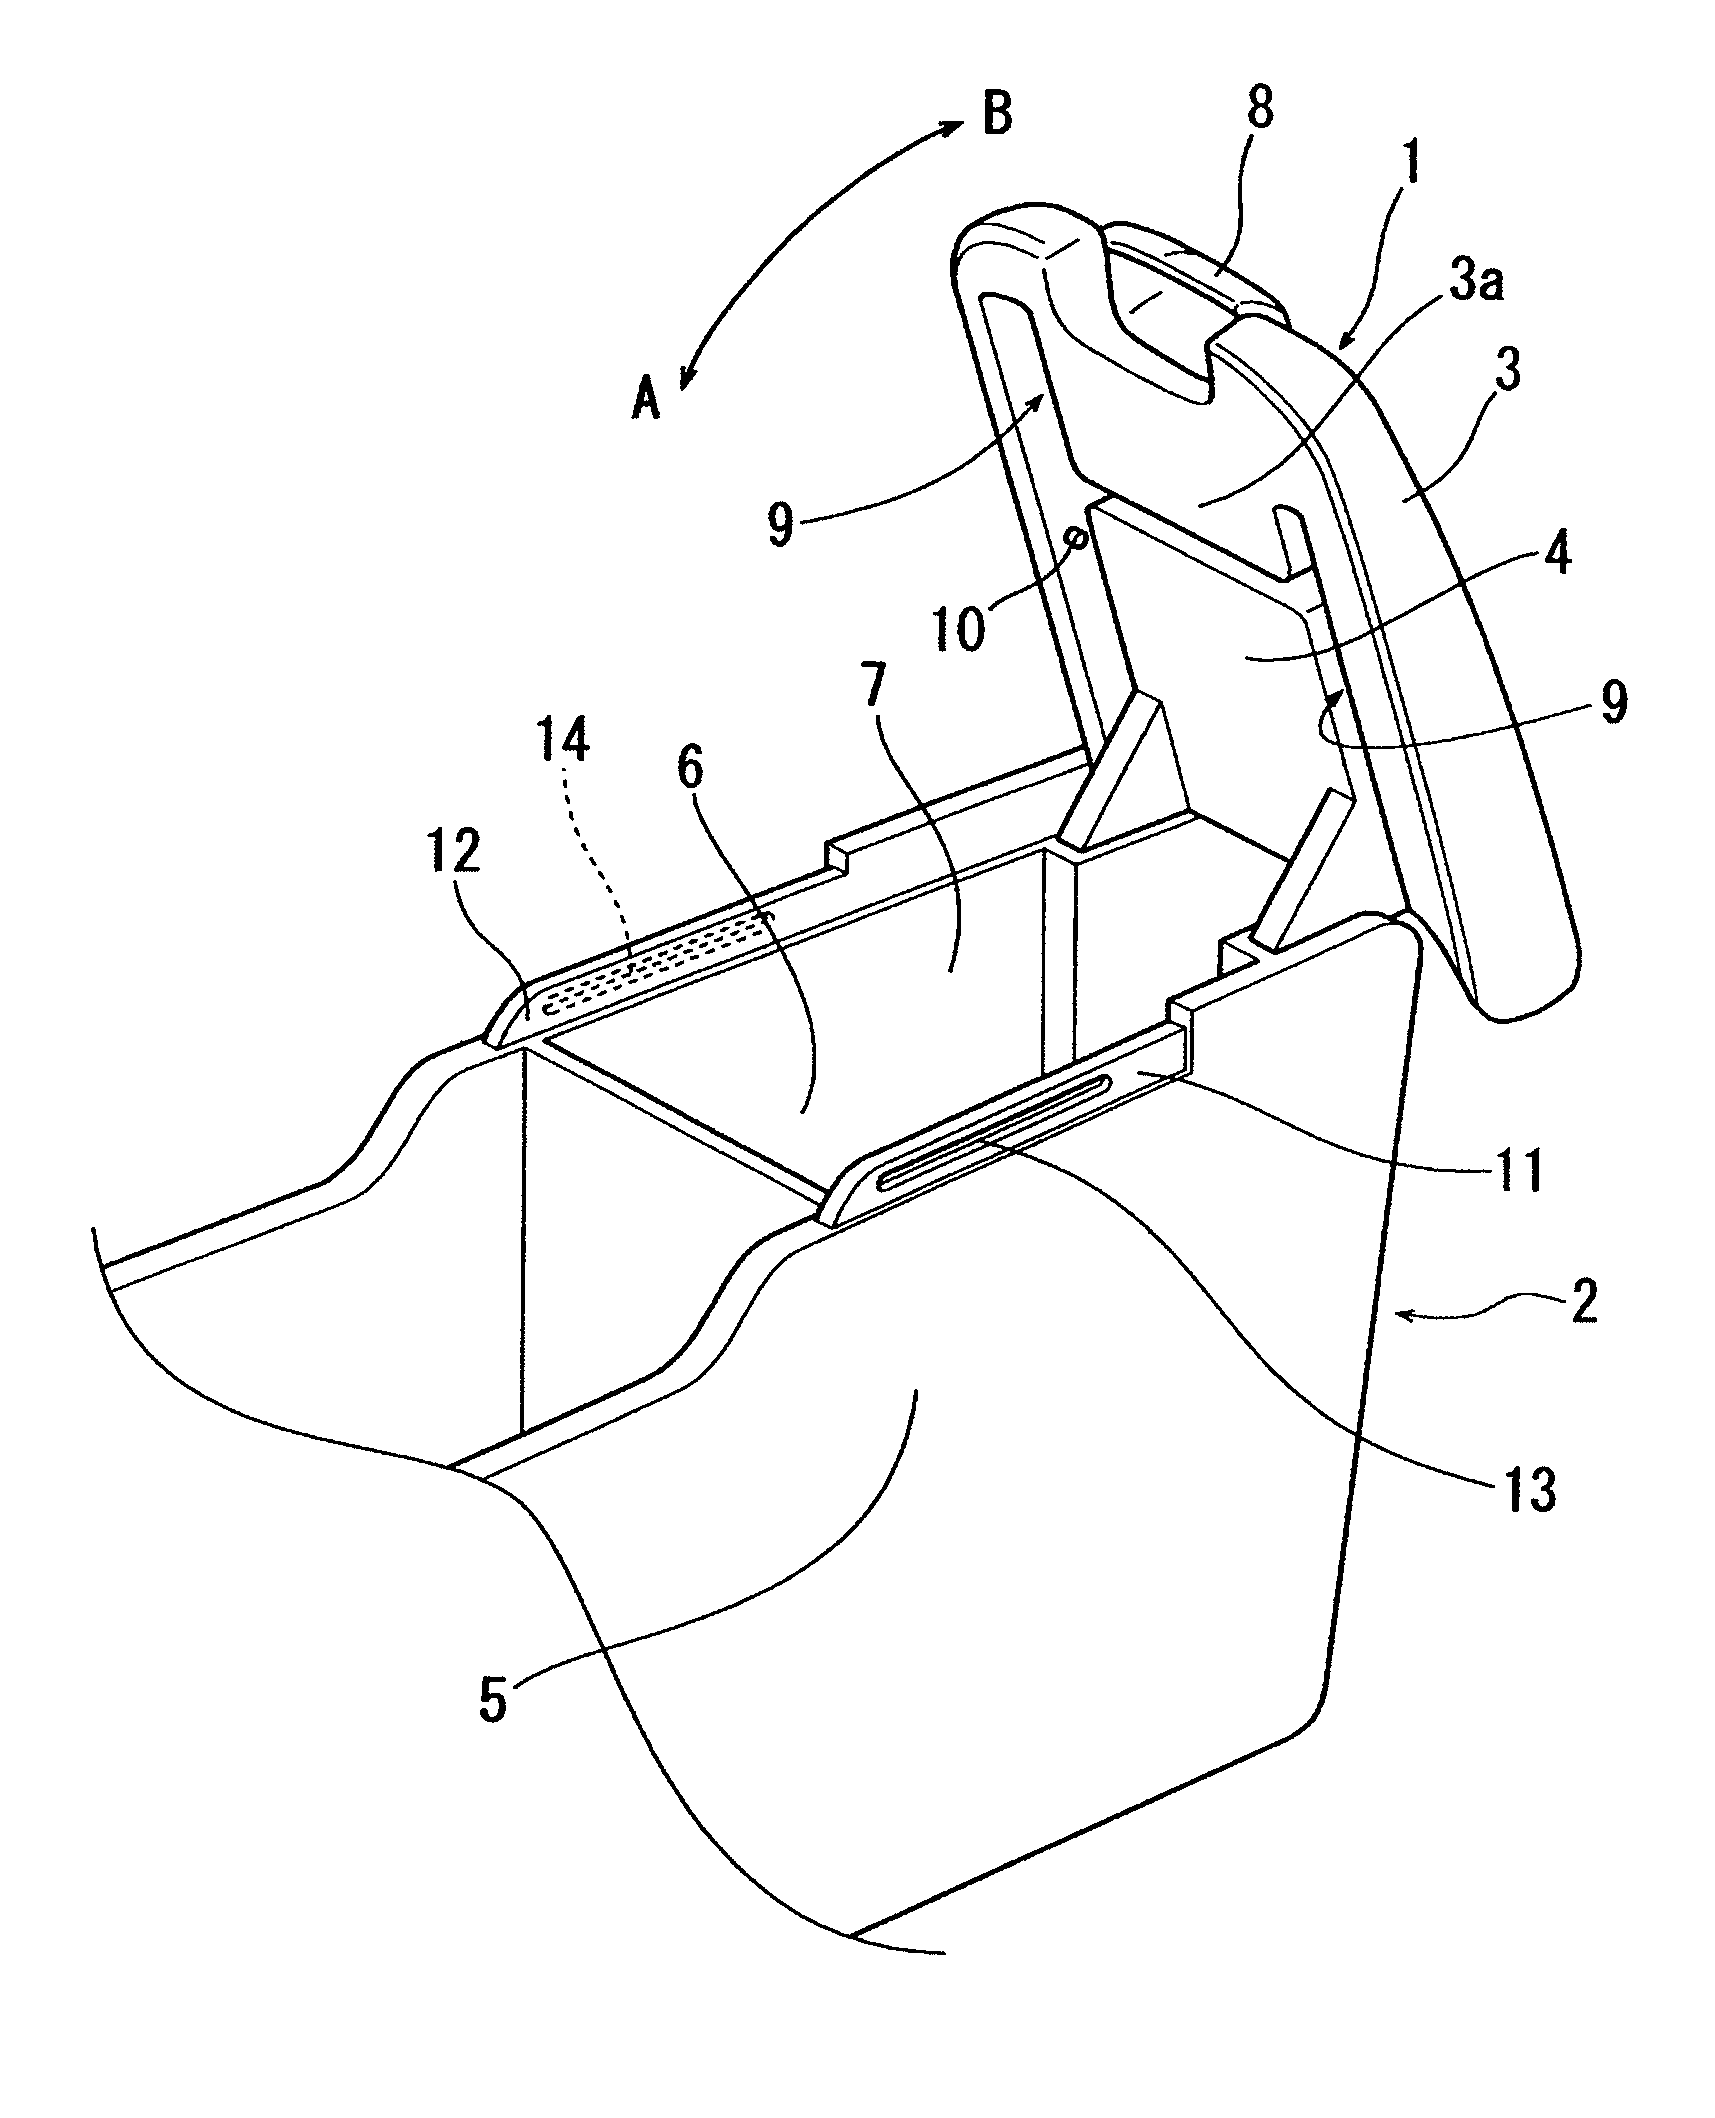 Vehicle console with adjustable armrest